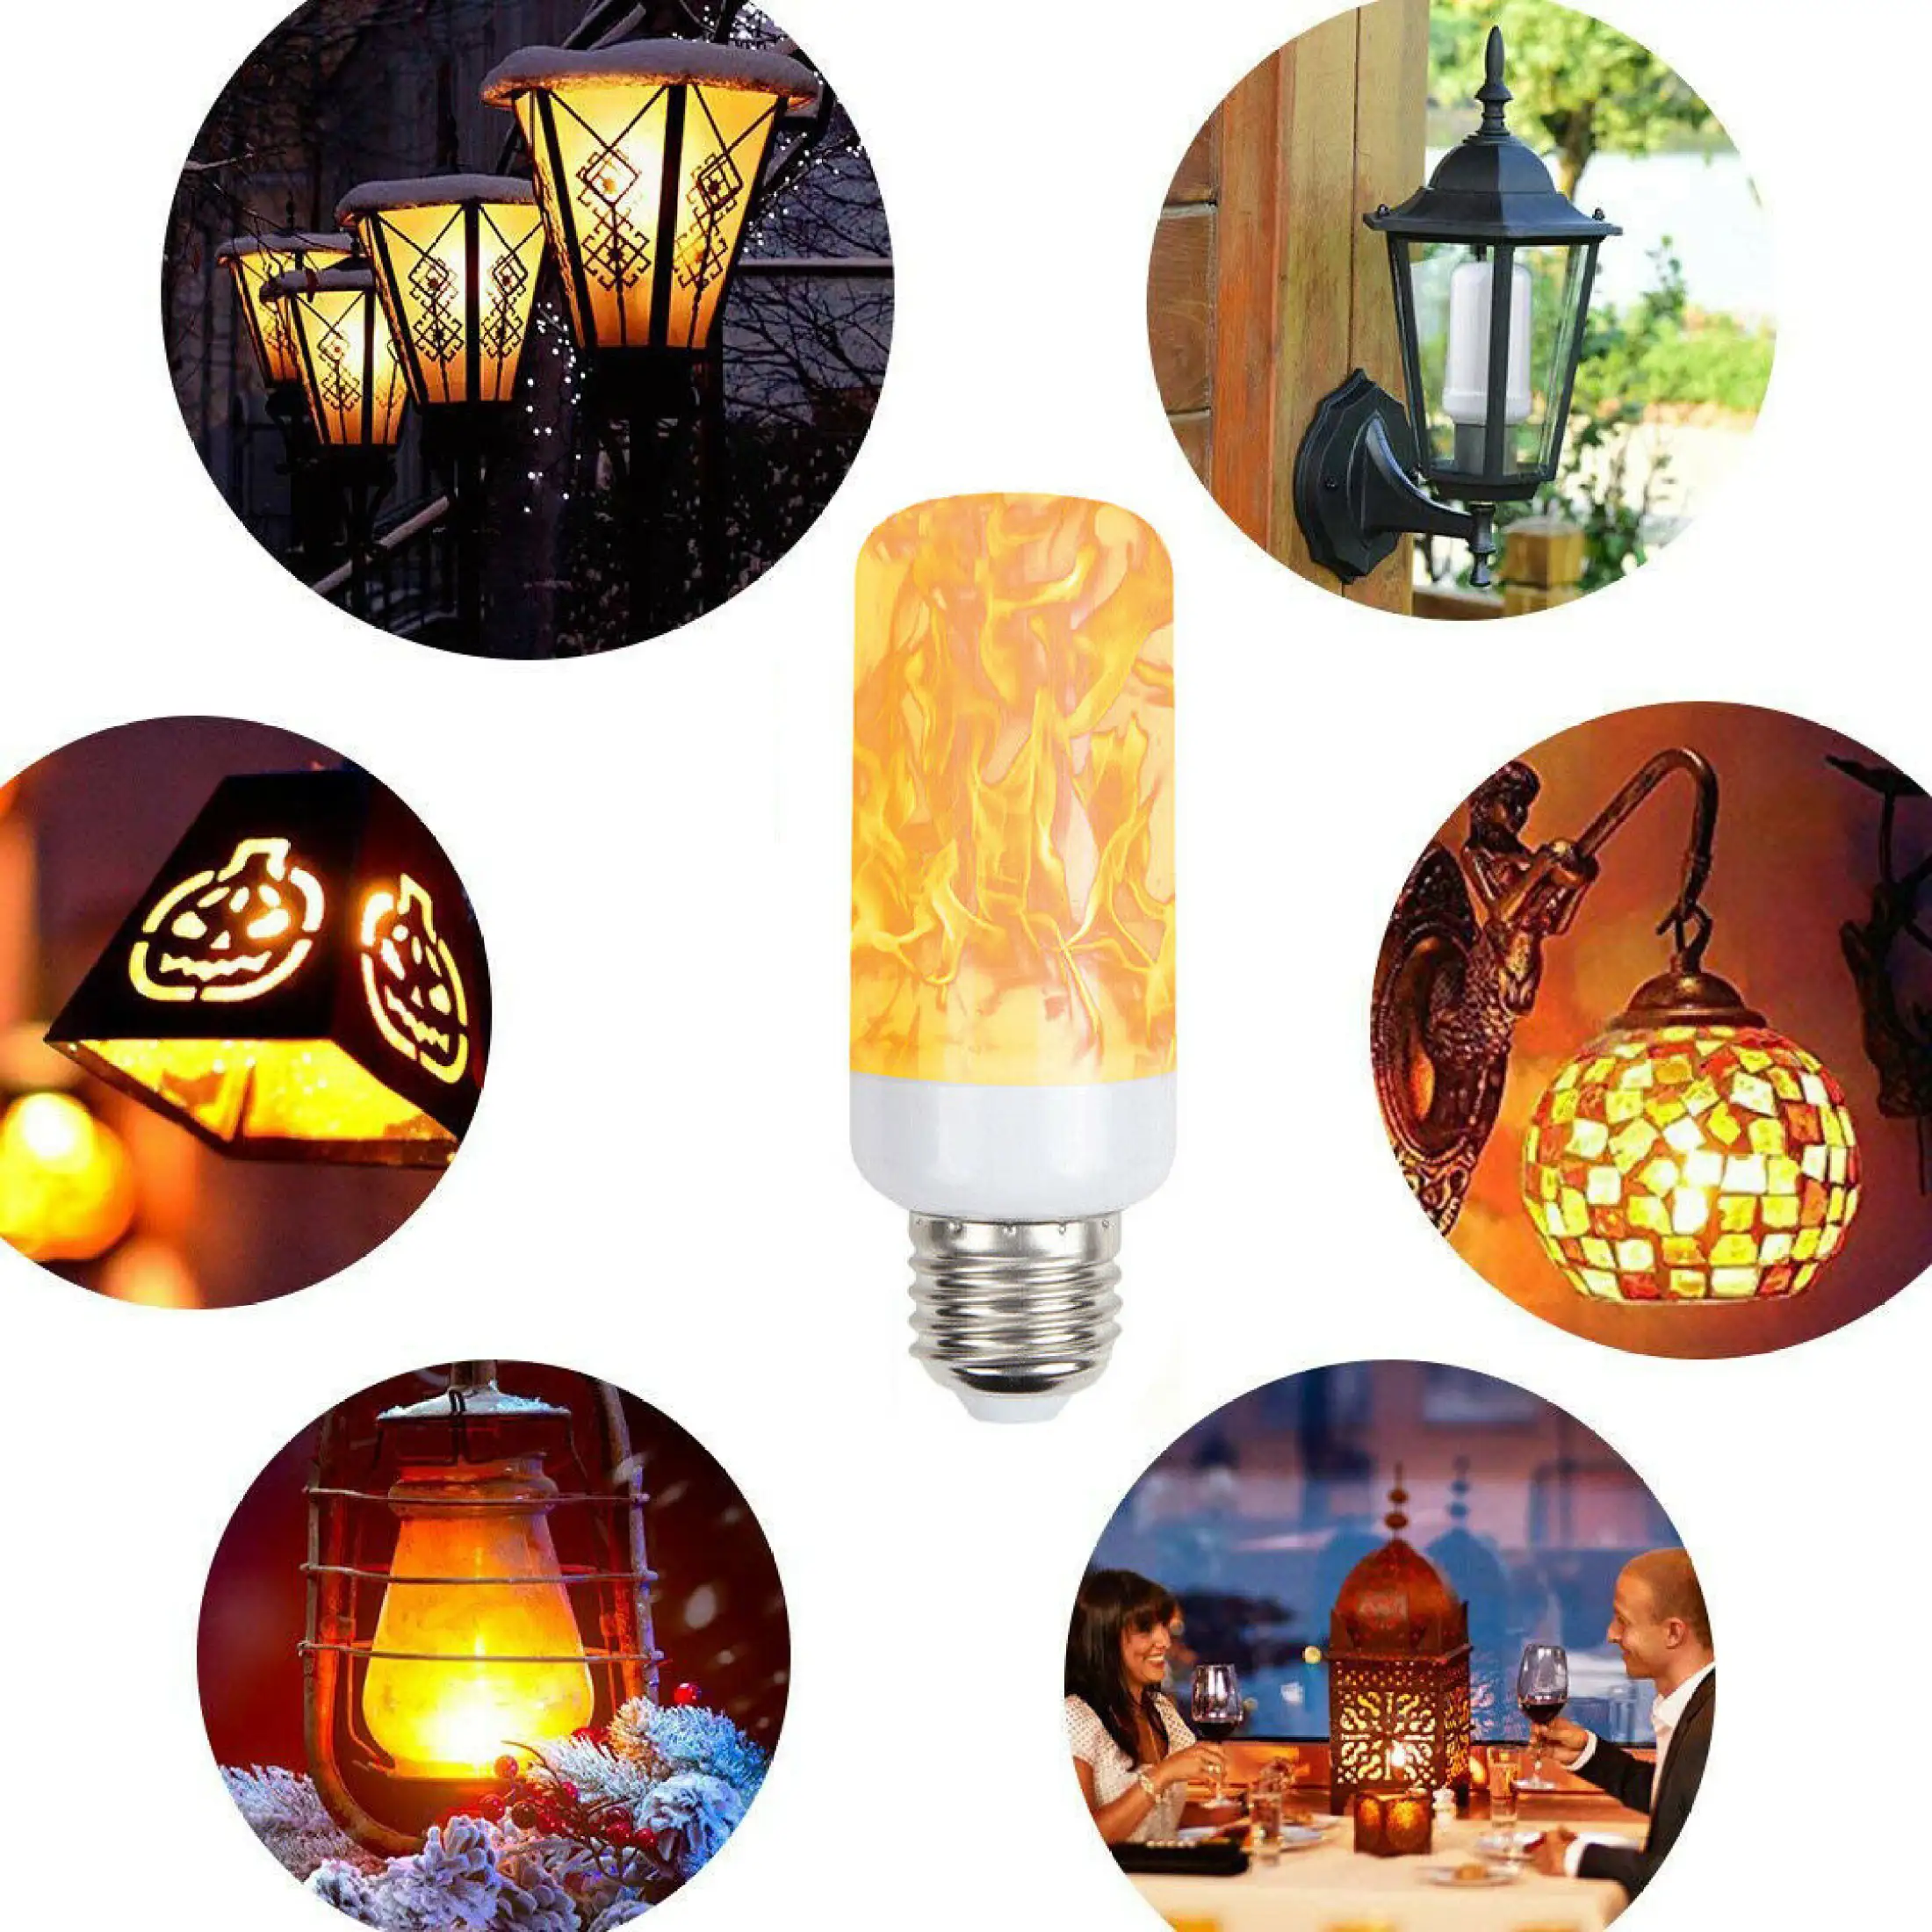 e27 led flicker flame light bulb simulated burning fire effect party lamp lazada singapore